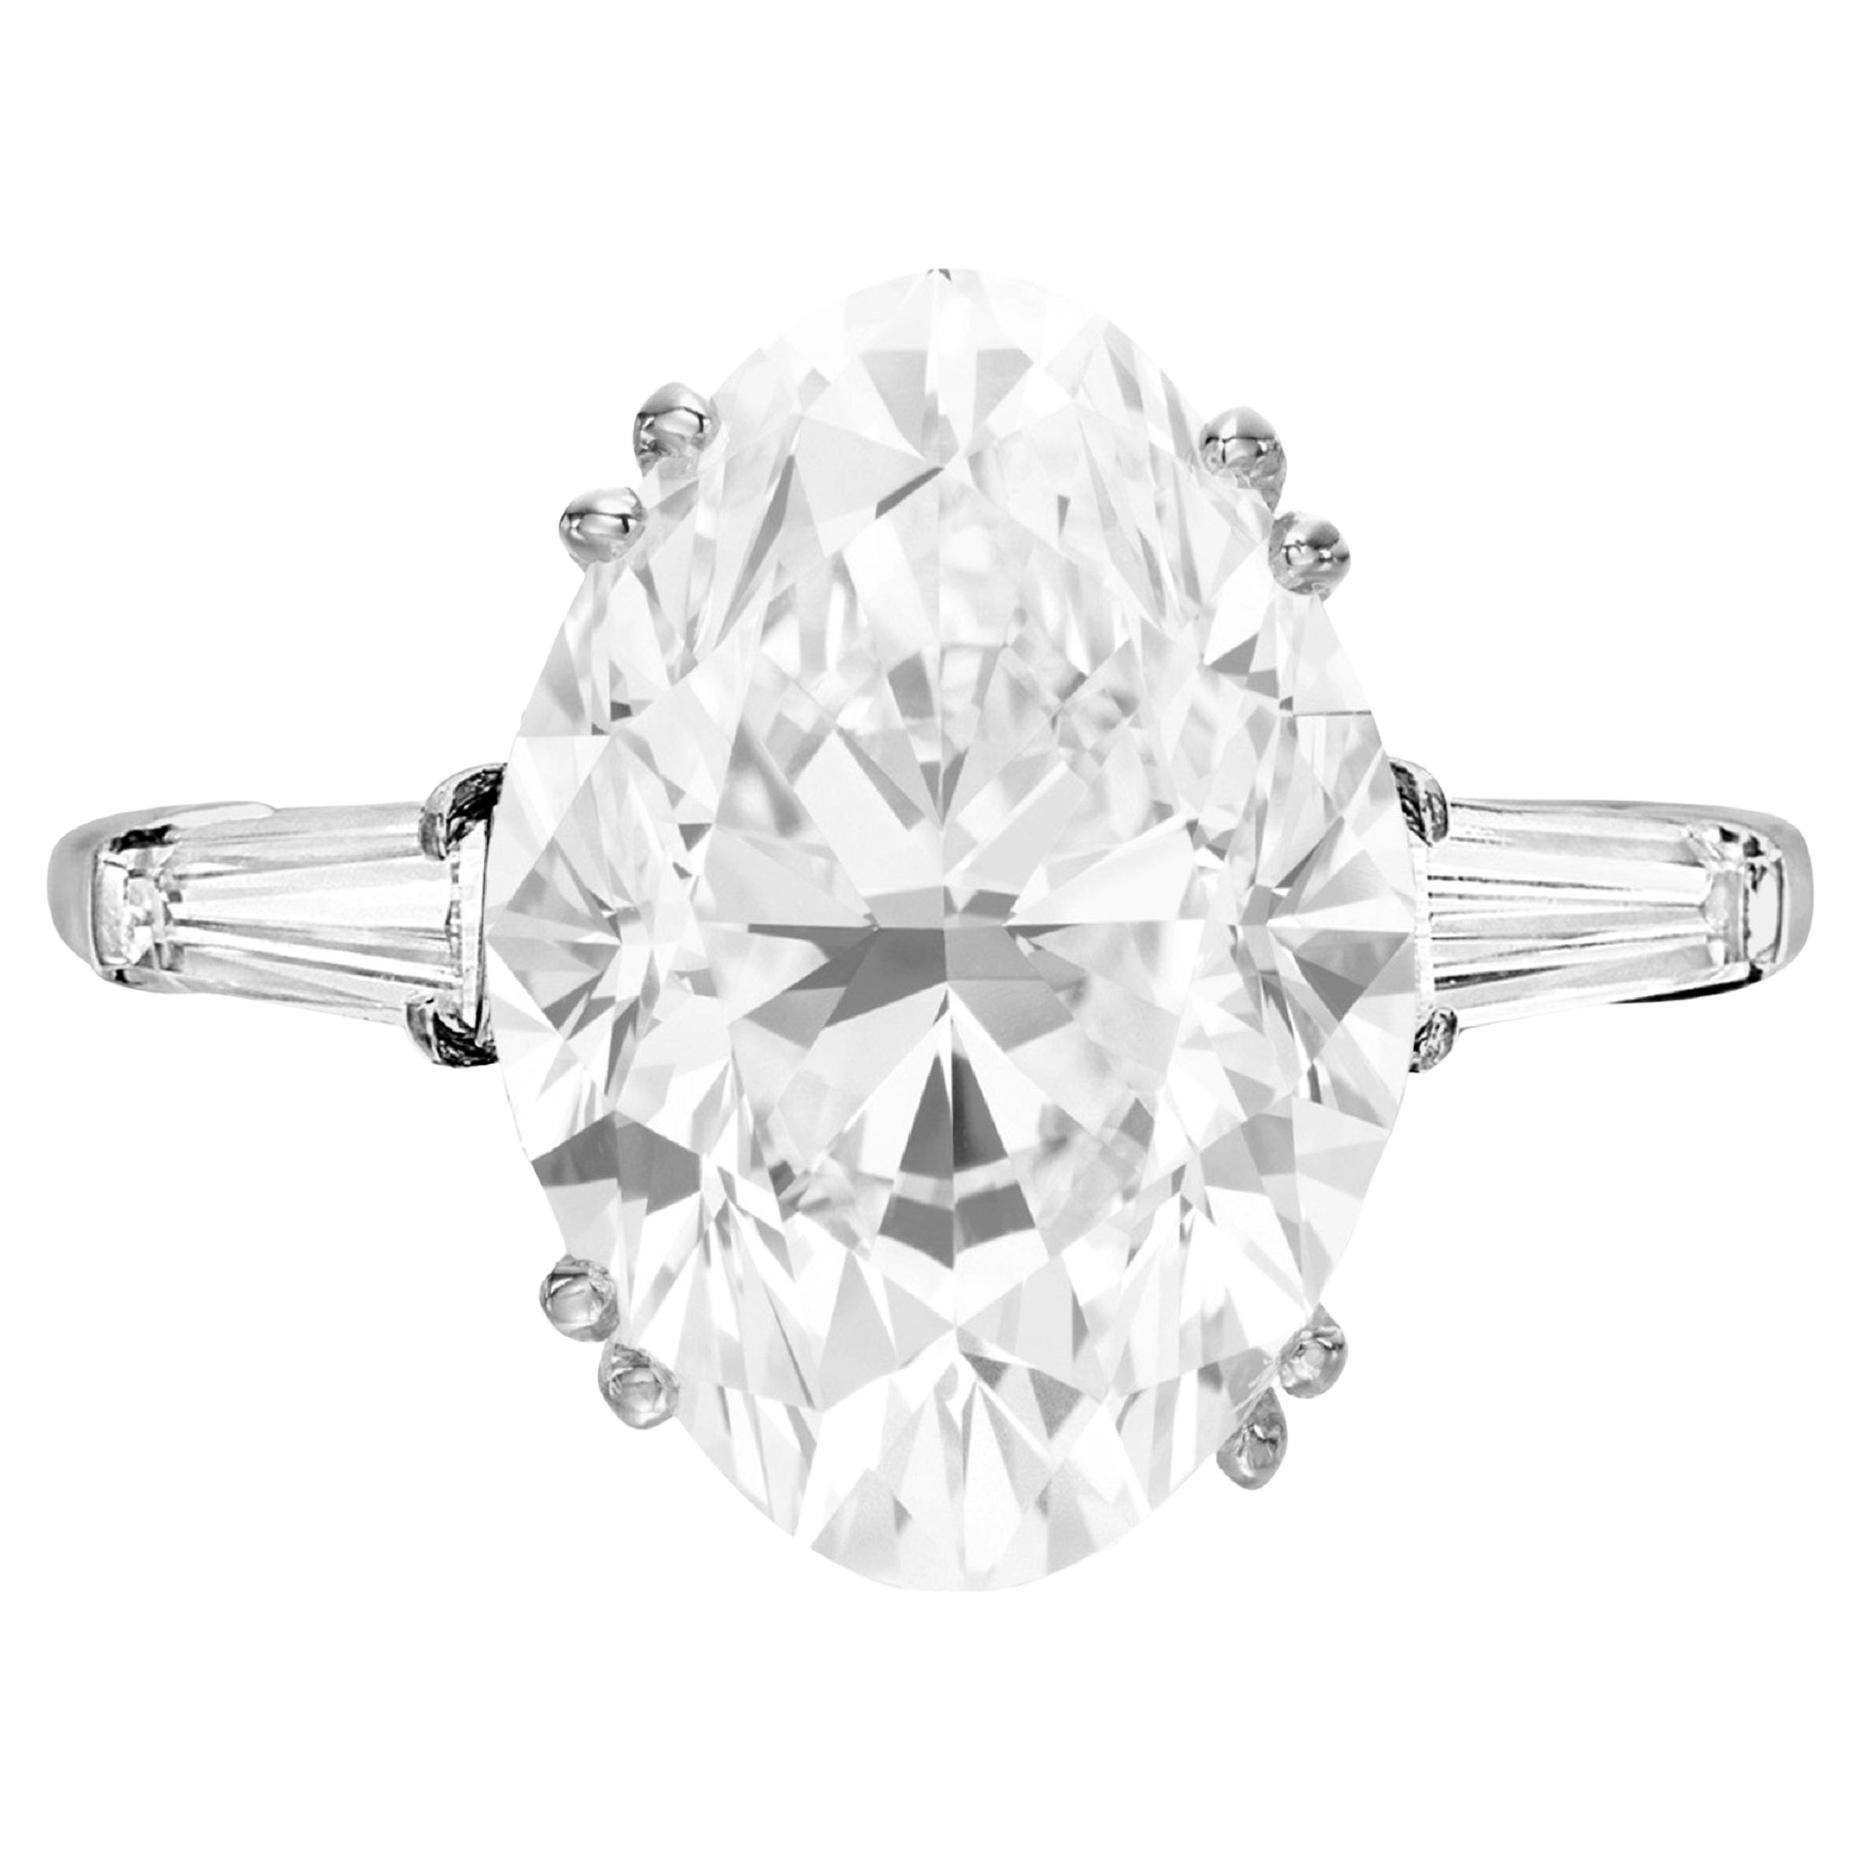 GIA Certified 3 Carat E Color VVS1 Clarity Oval Cut Diamond Solid Platinum Ring